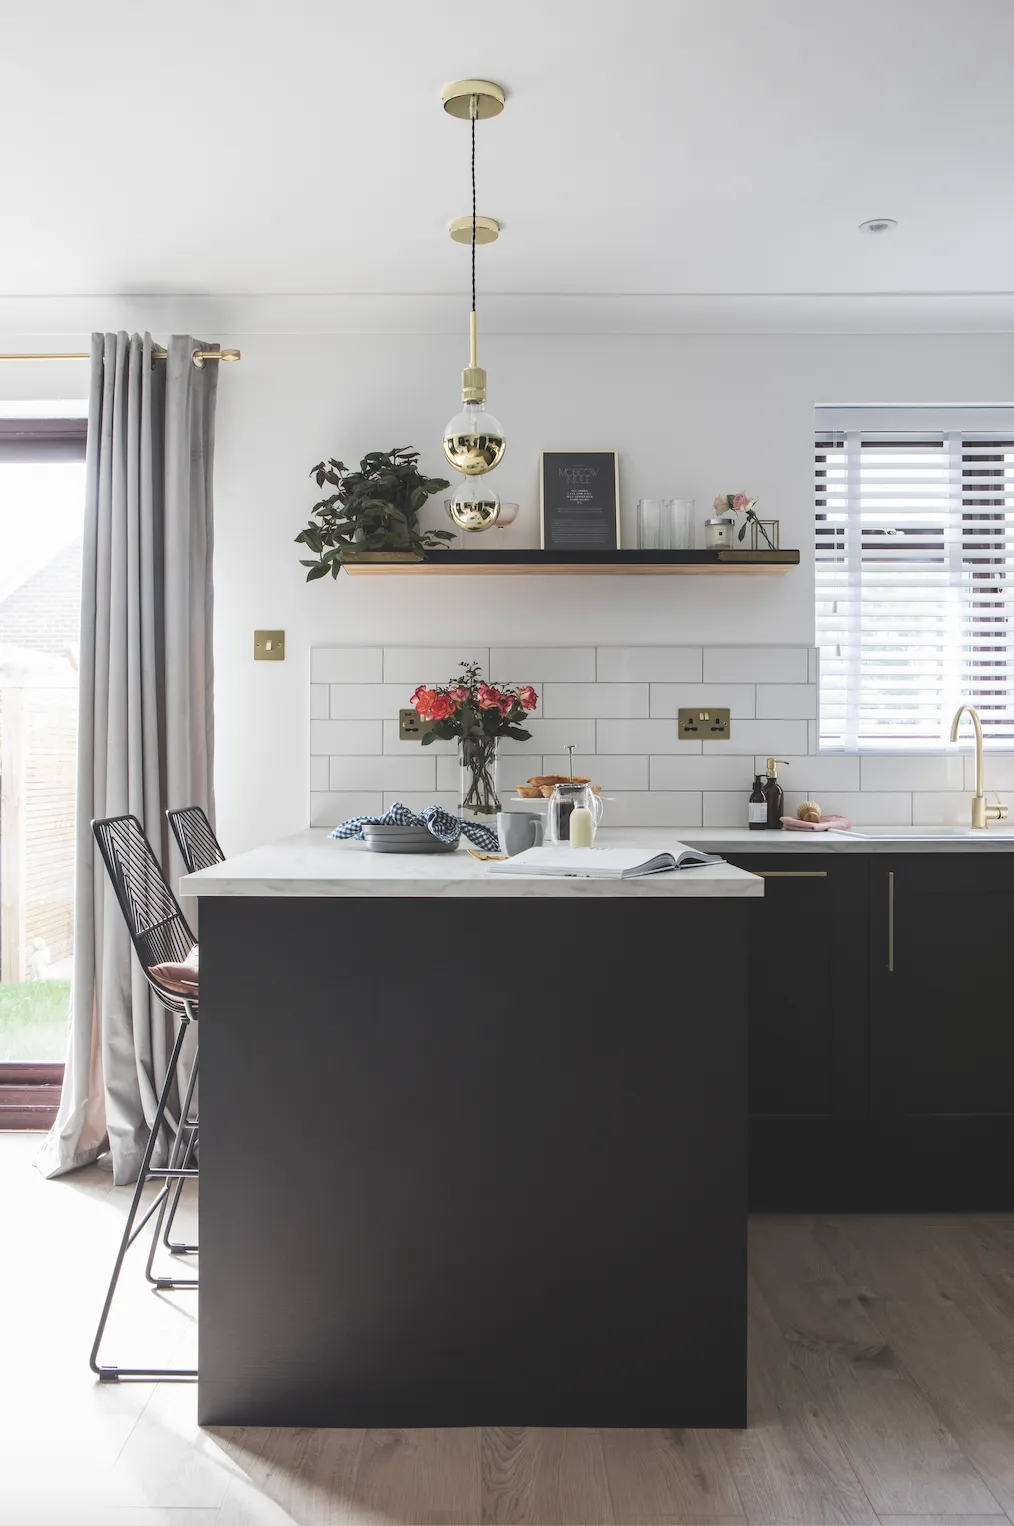 The breakfast bar is a focal point thanks to custom pendants from Creative Cables. ‘I put together my own look choosing the ceiling rose, cable, lamp holder and half-brass bulbs, which look lovely without lampshades,’ says Becca